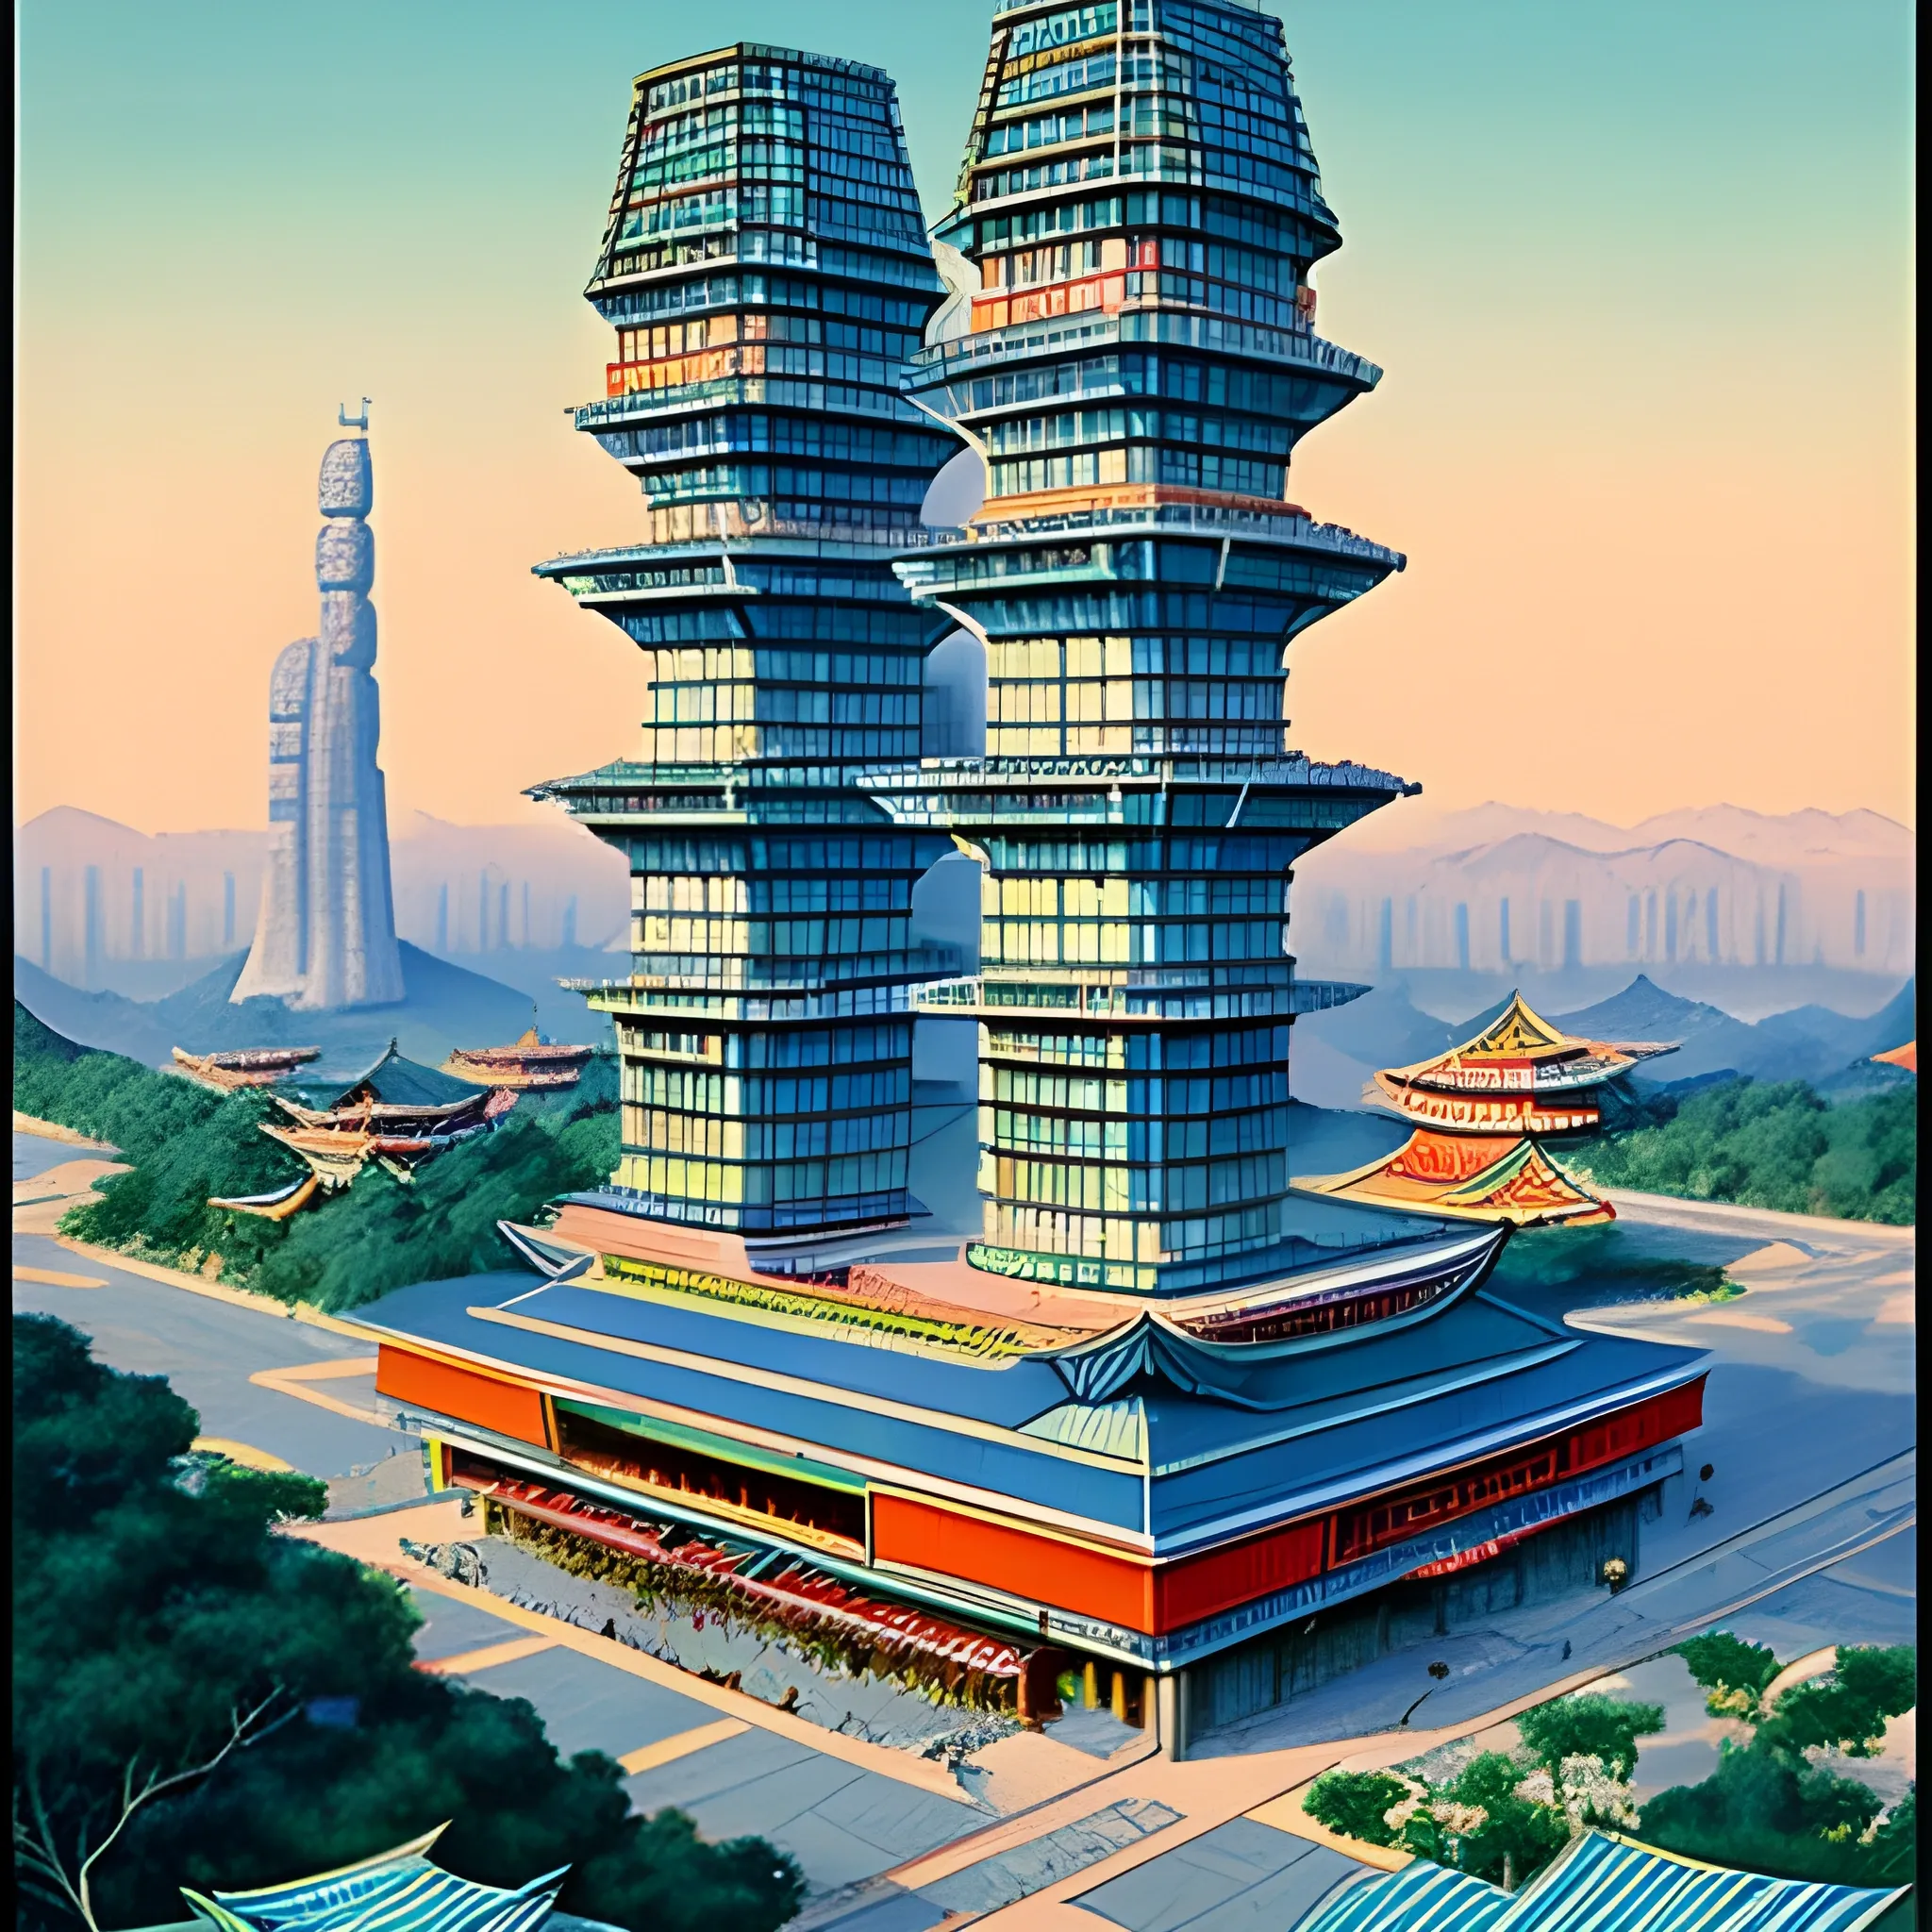 1960 china, with a mix of modern architecture, drawn in Jean Giraud's art style, full view
